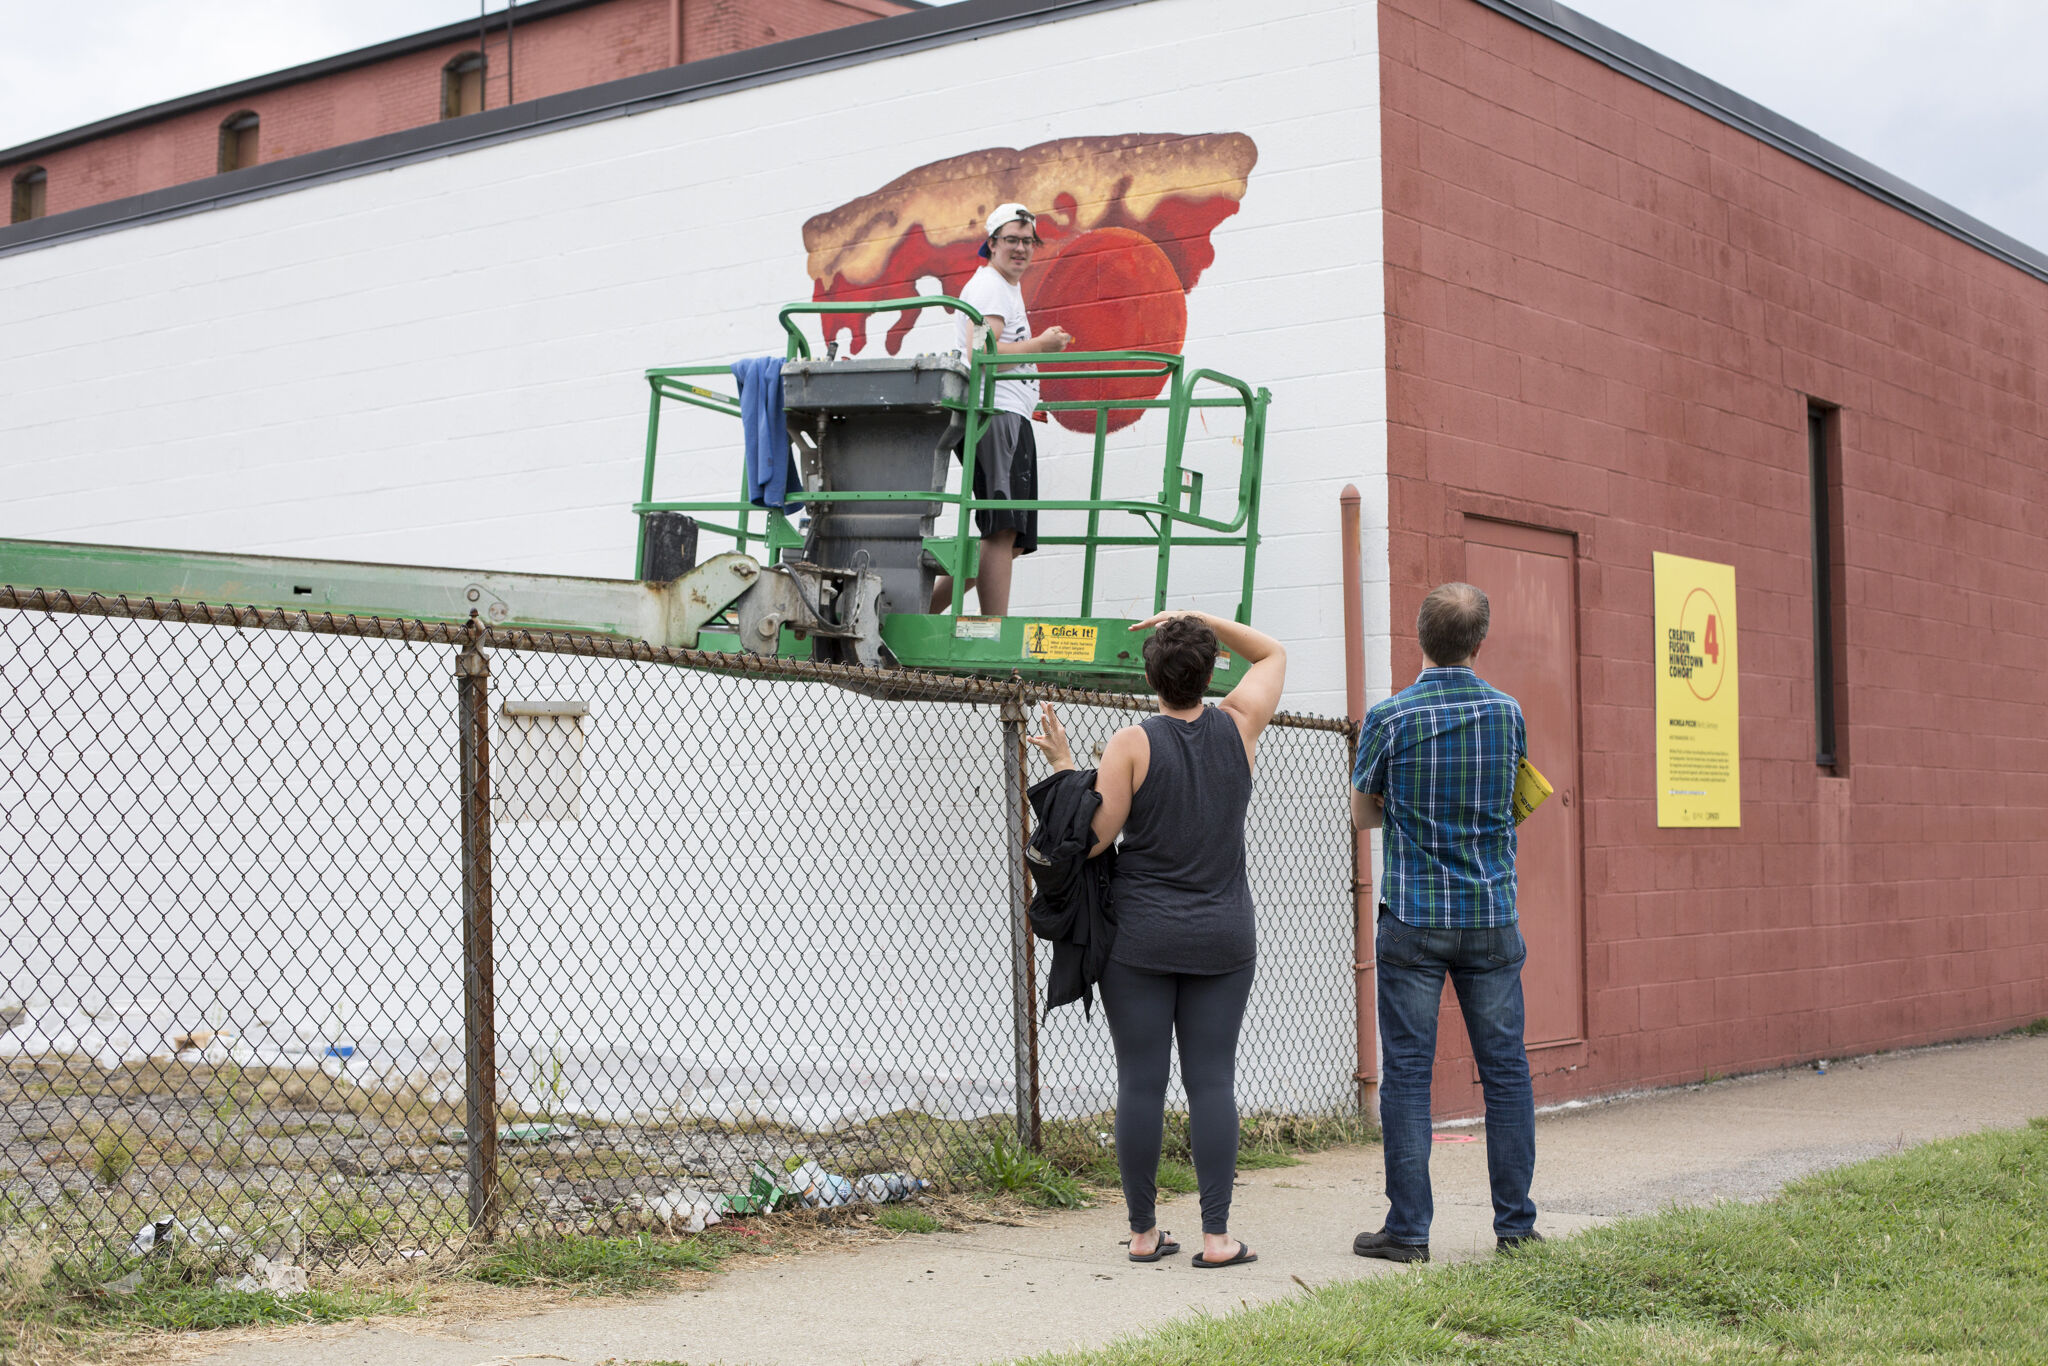 Mike Sobeck&mdash;The Pizza Mural